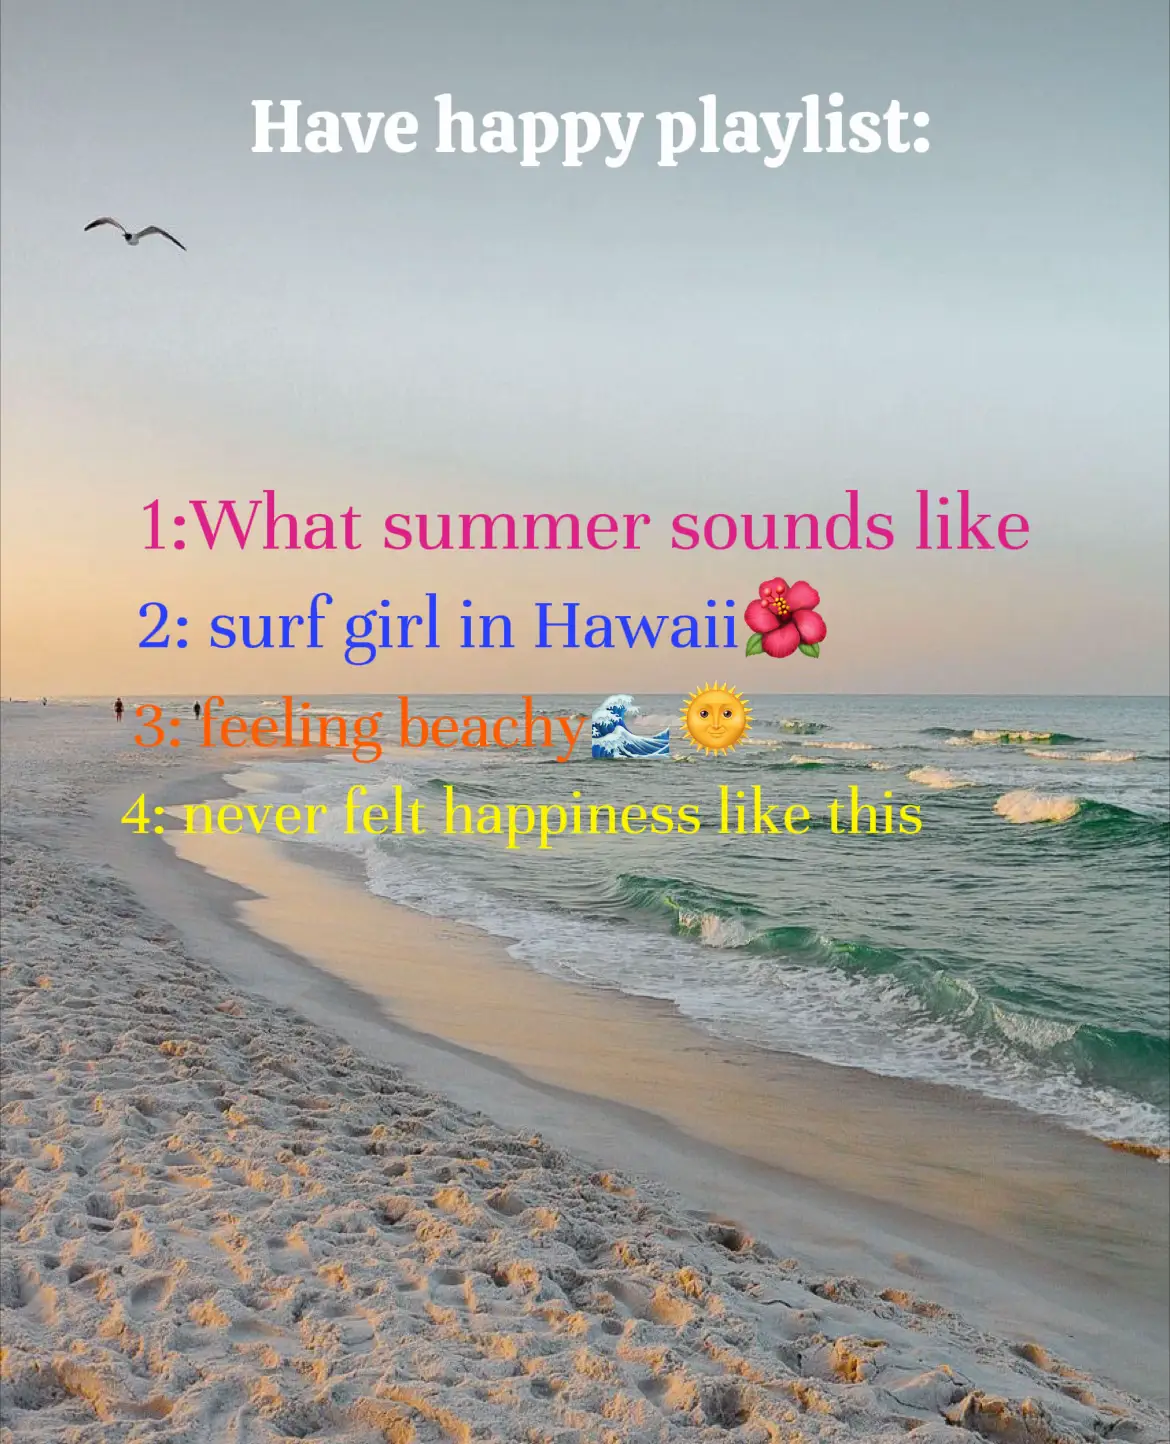  A beach scene with a happy playlist of music.